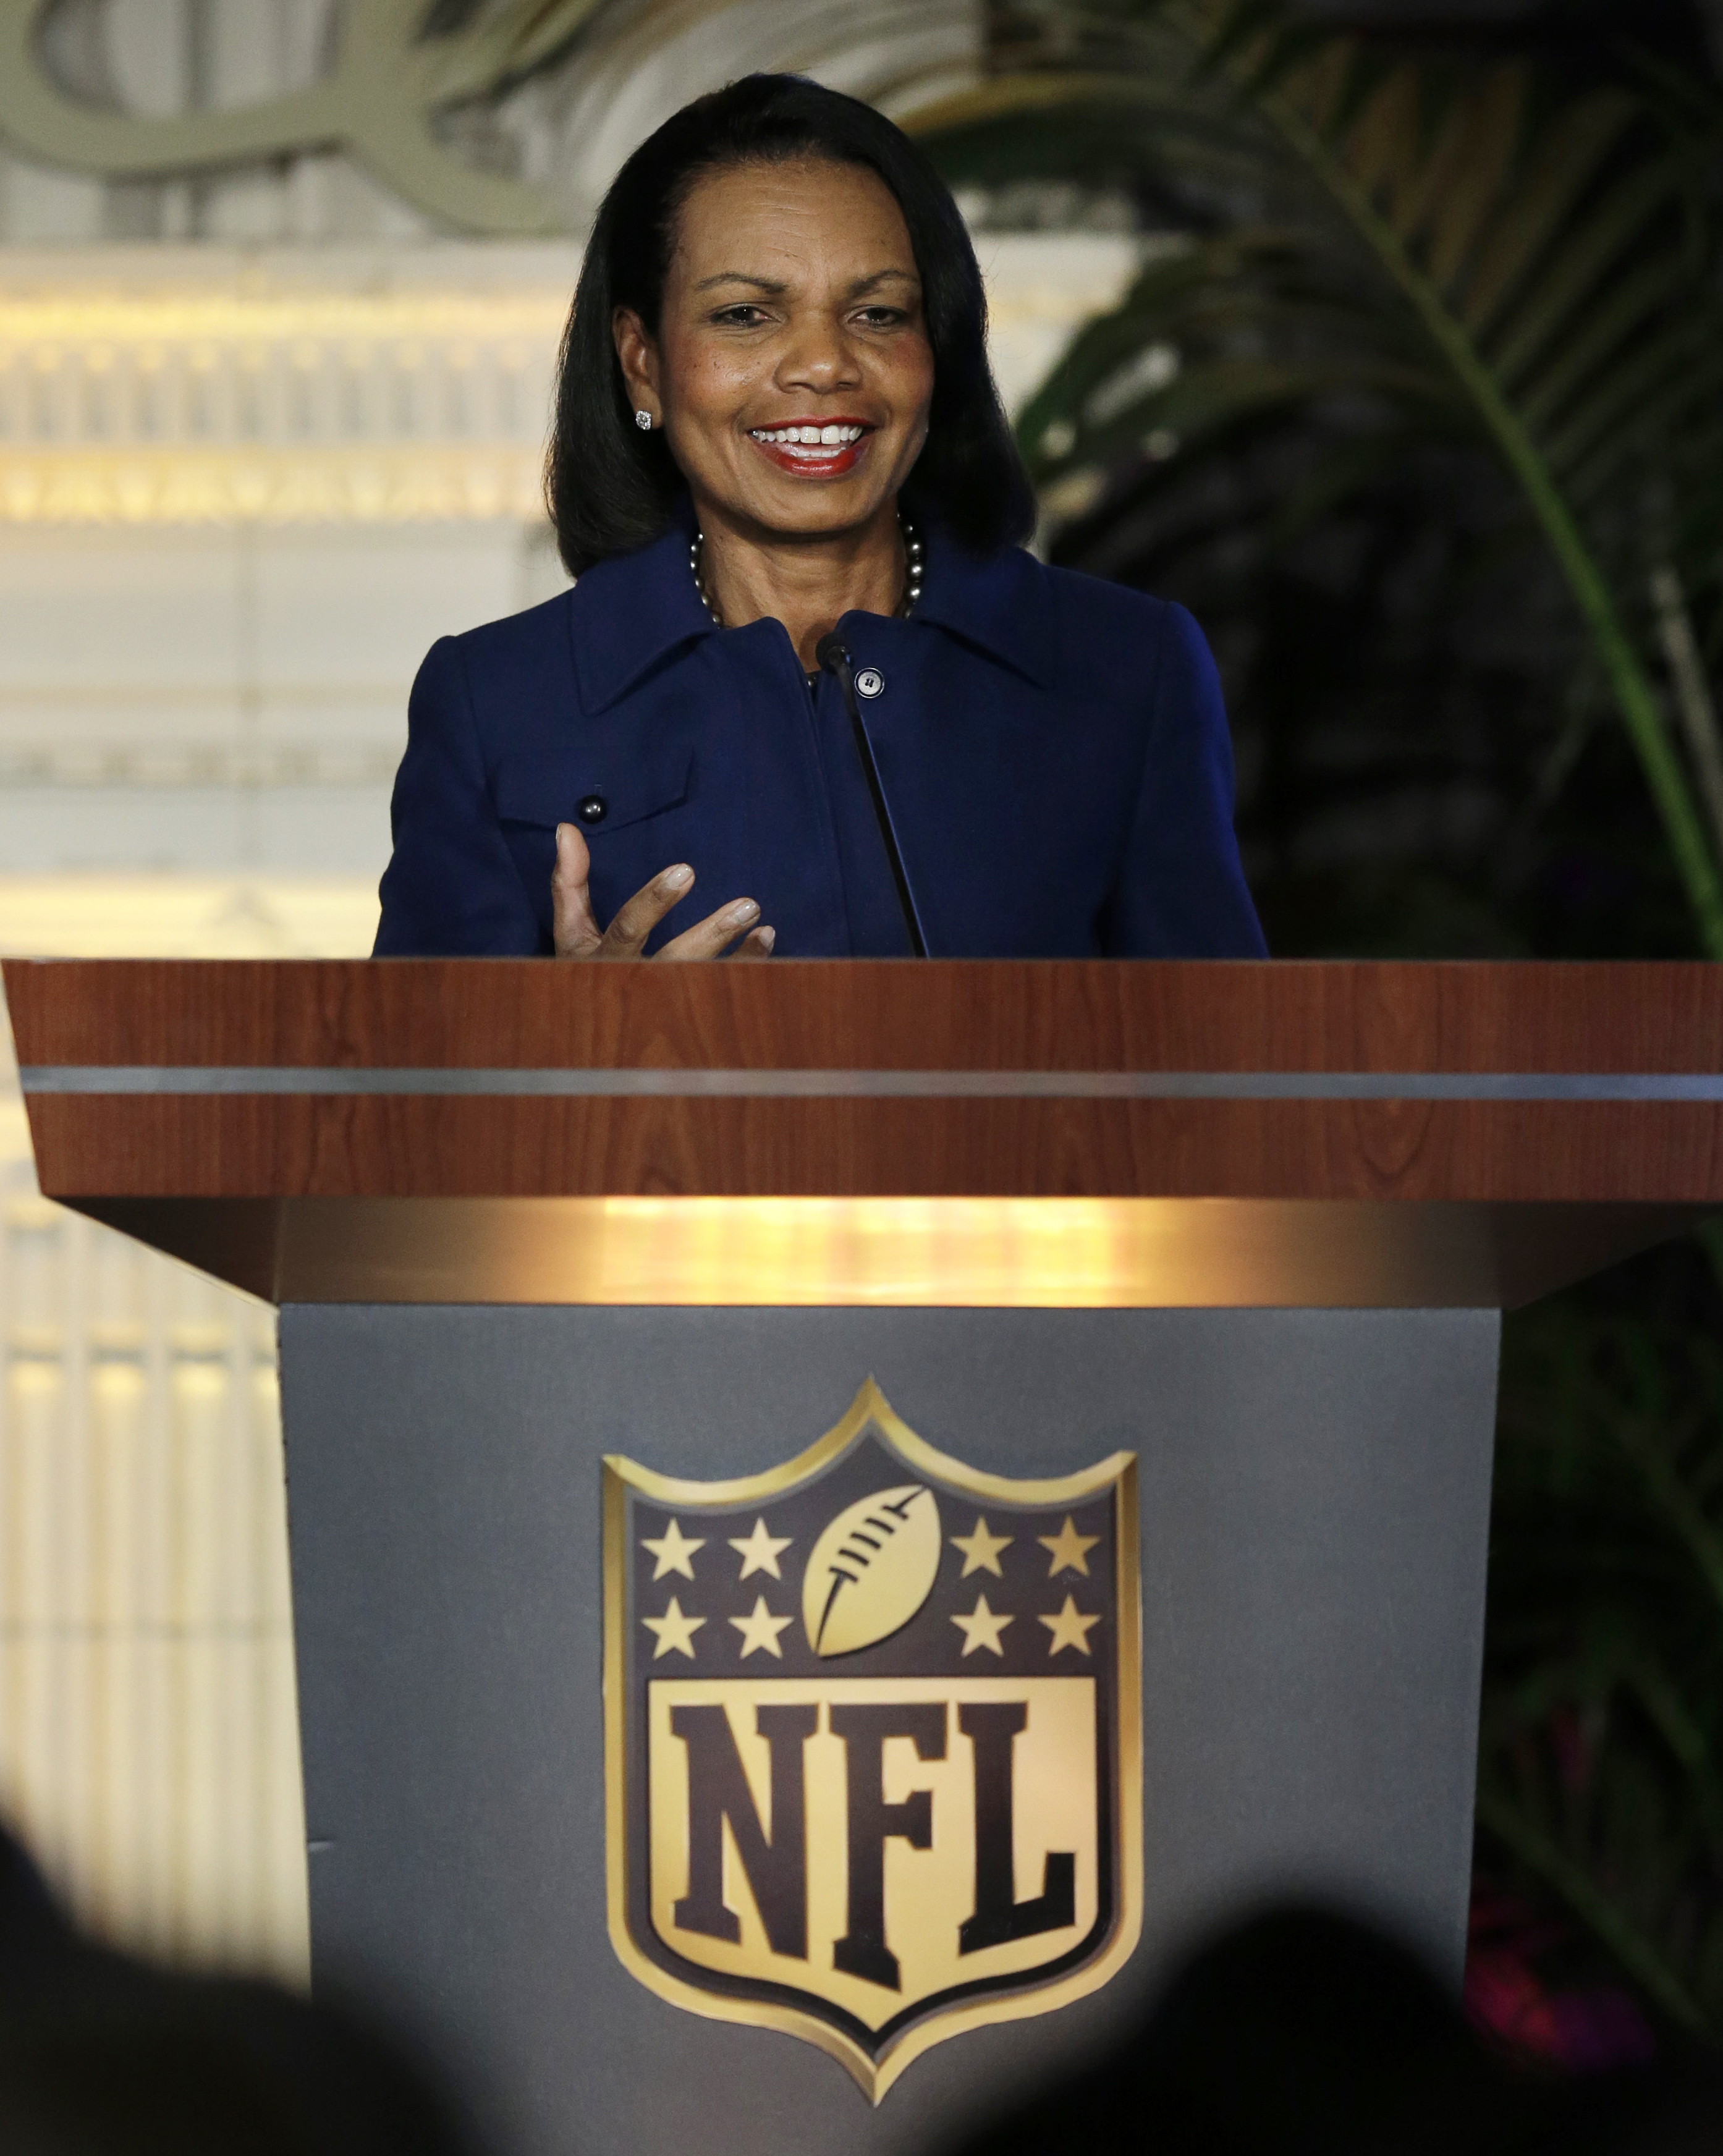 Condoleezza Rice gestures while speaking at the NFL Womens Summit on Feb. 4, 2016, in San Francisco. (Ben Margot—AP)